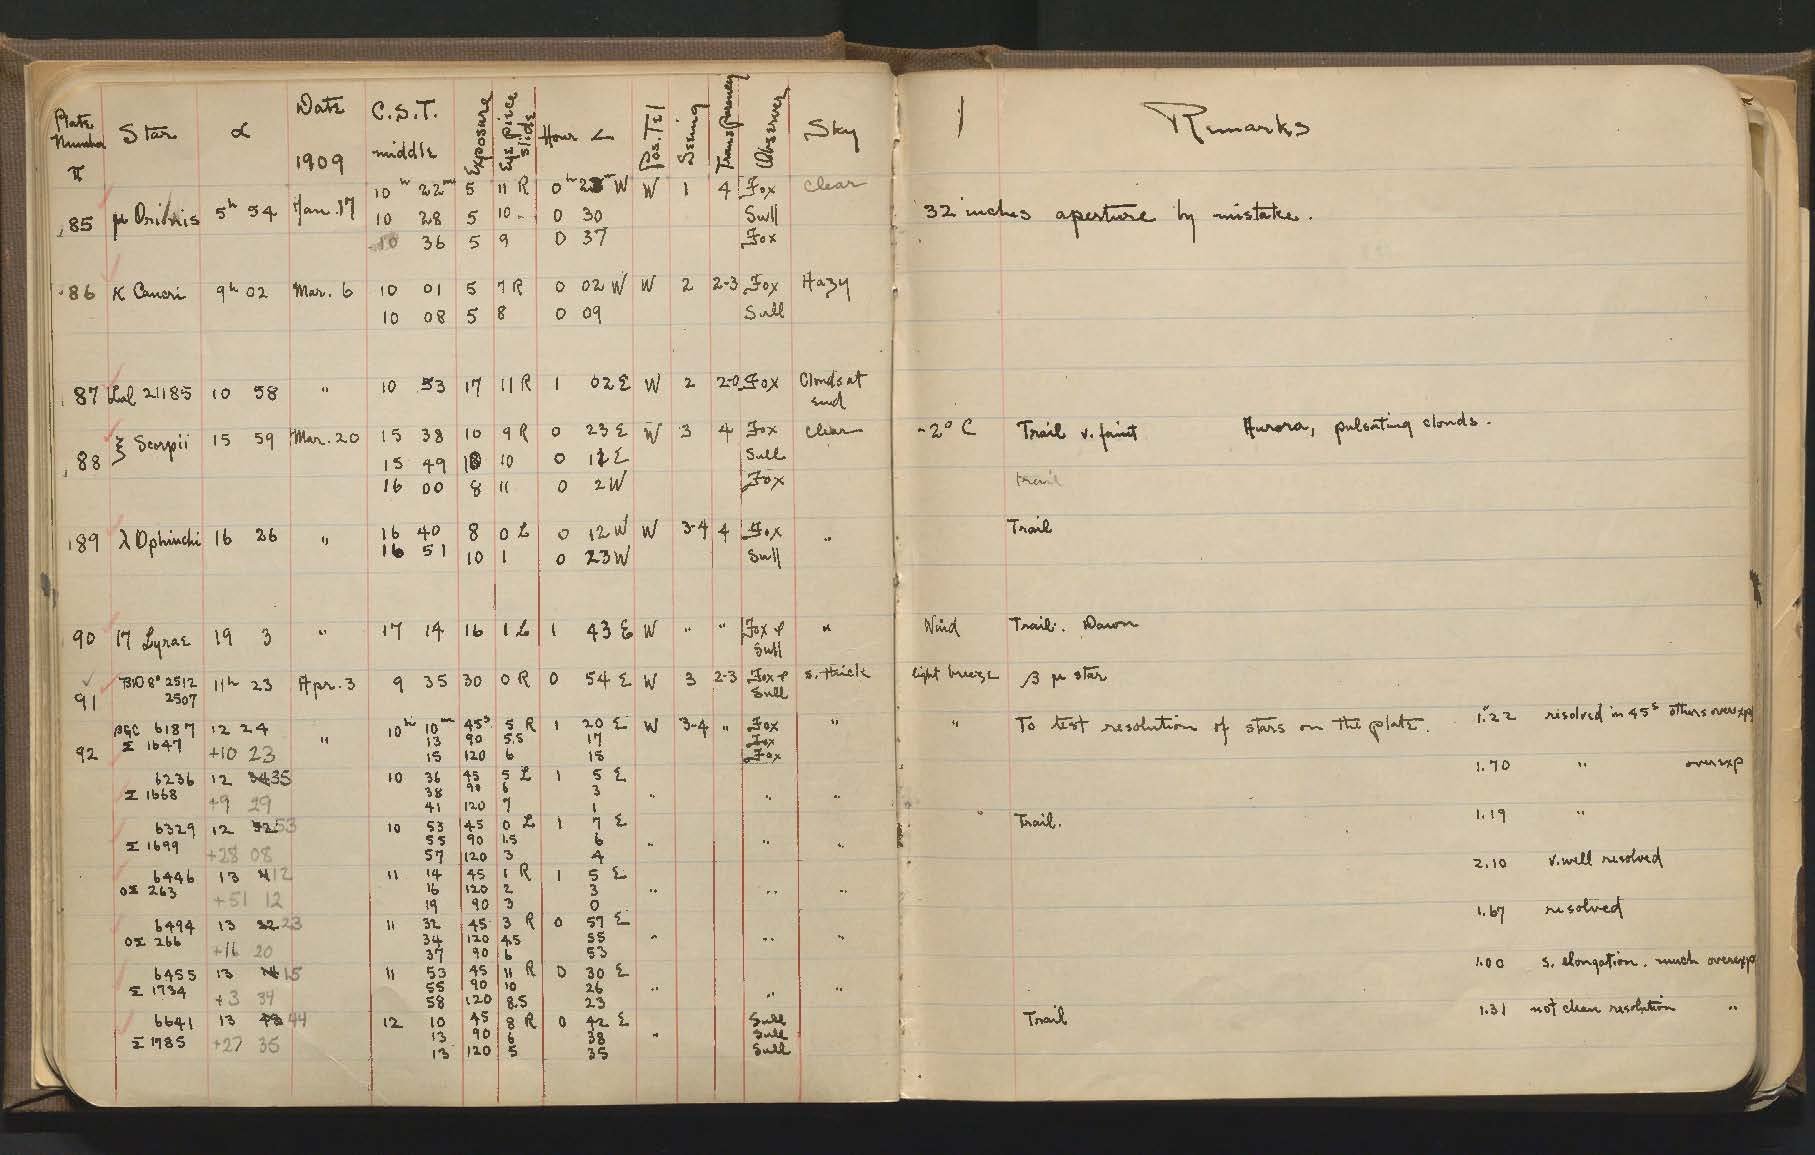 A lined notebook open to a 2 page spread. There are 14 columns from left to right. They are plate number star, right ascension (indicated with a lowercase Greek alpha), Date, C.S.T. middle, Exposure, eyepiece slide Hr. Angle Pos. Tel. Seeing, Transparency, Observer, Sky, and Remarks. There are handwritten notes in each of the columns.